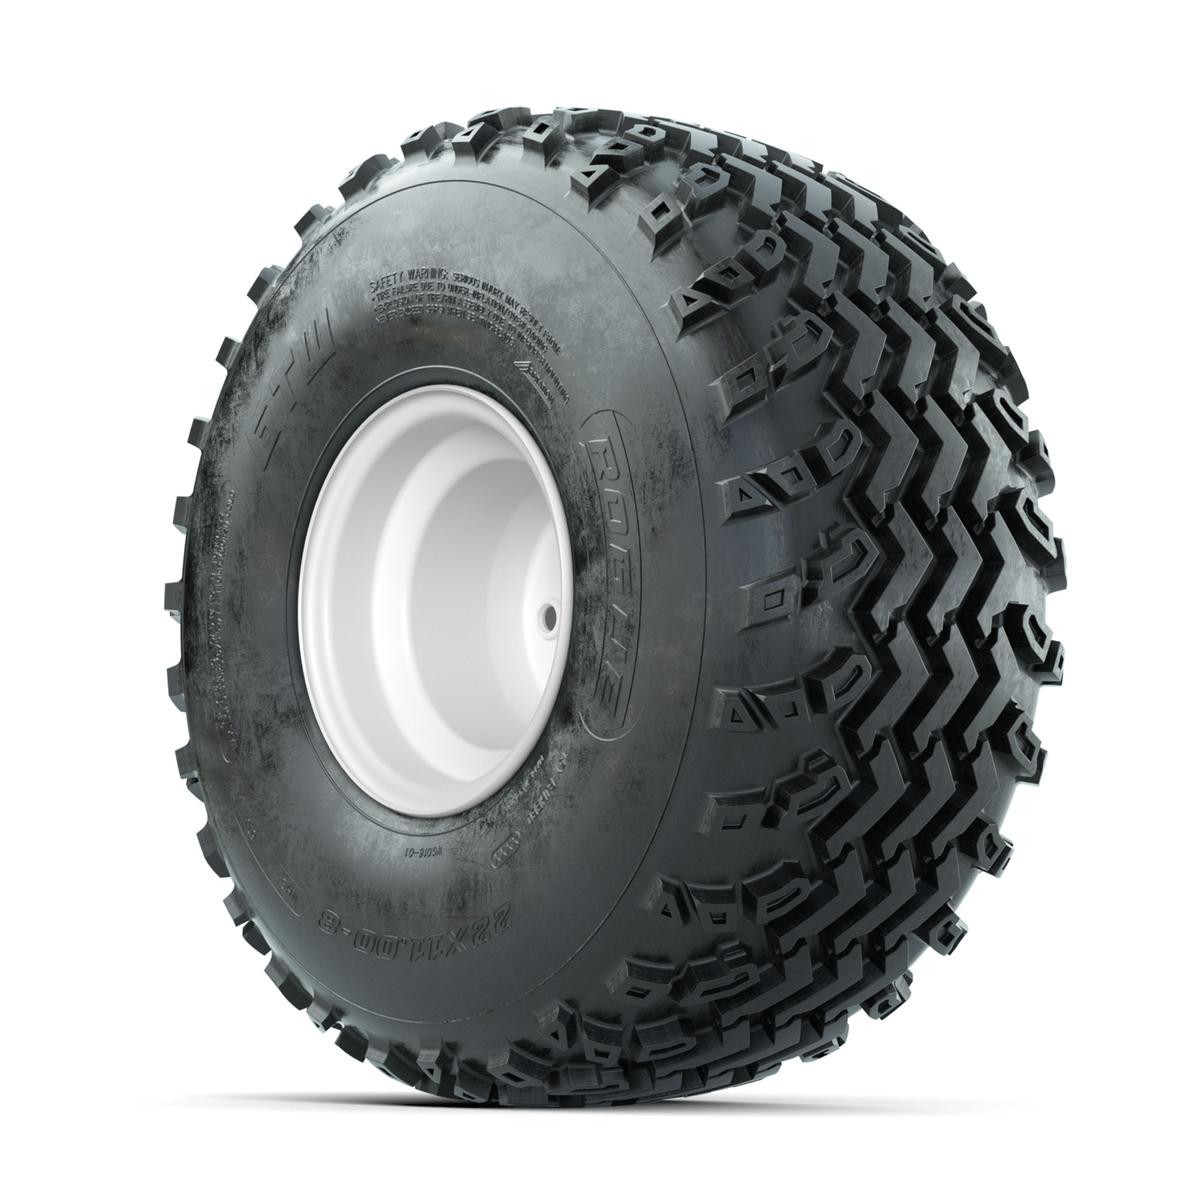 GTW Steel White 2:5 Offset 8 in Wheels with 22x11.00-8 Rogue All Terrain Tires – Full Set